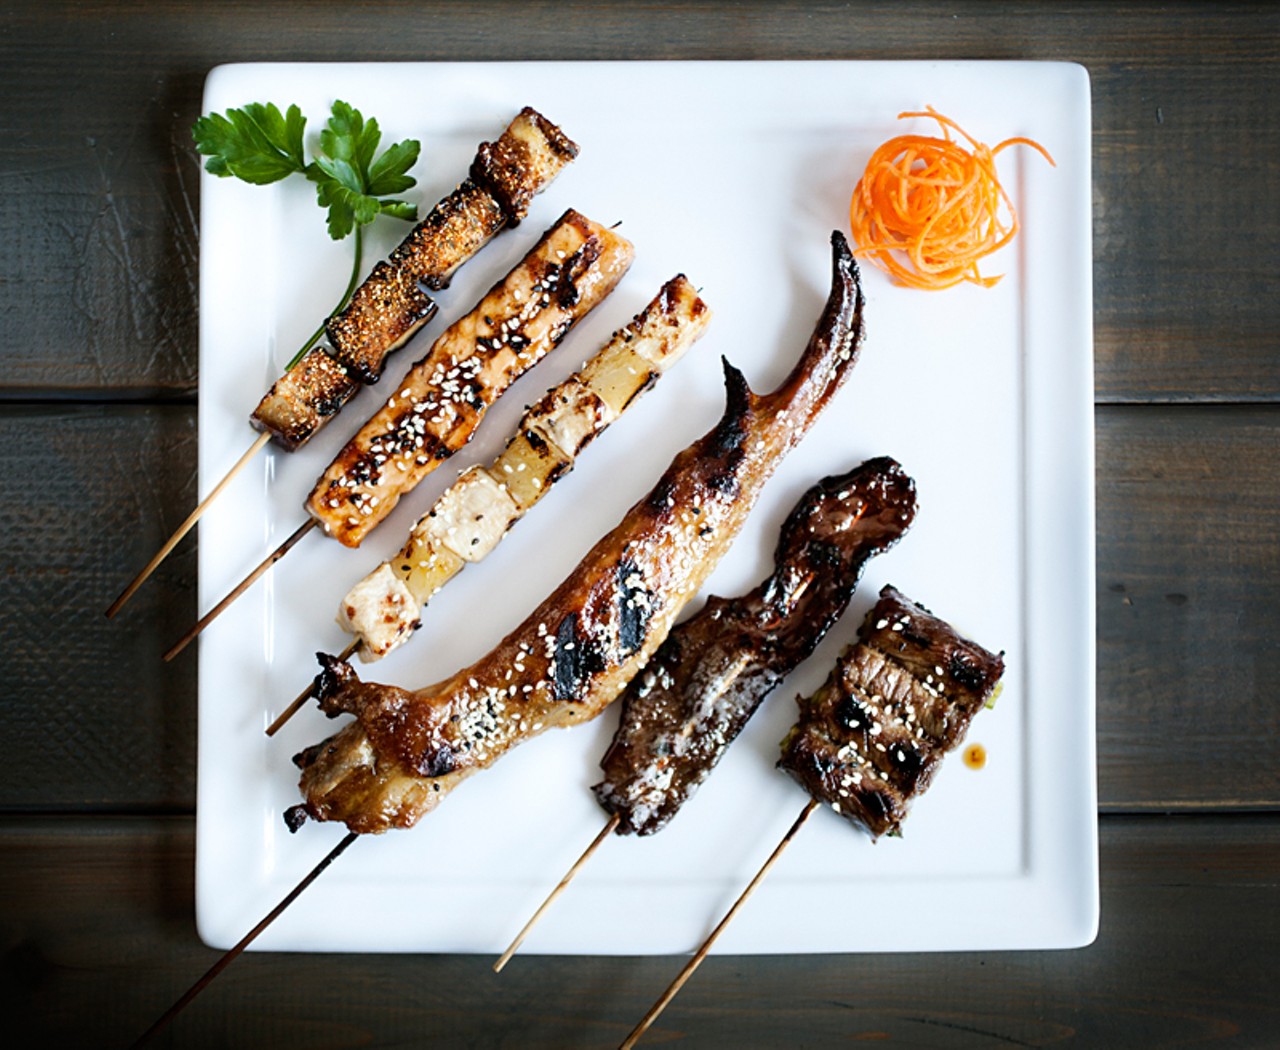 From the grilled or Yakitori menu is a set of grilled togarqashi pork belly, teriyaki salmon, pineapple chicken, duck, black pepper steak and beef wrapped asparagus.